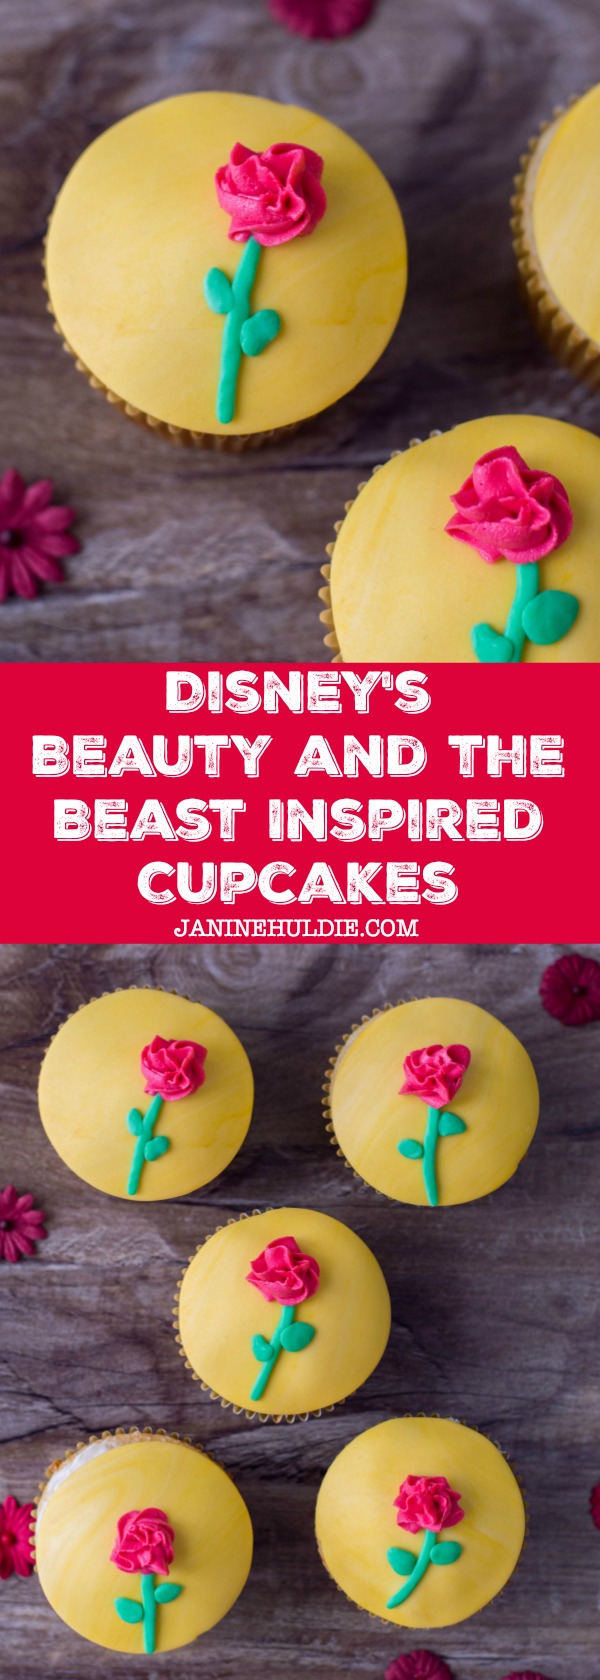 Disney's Beauty and the Beast Inspired Cupcakes Recipe